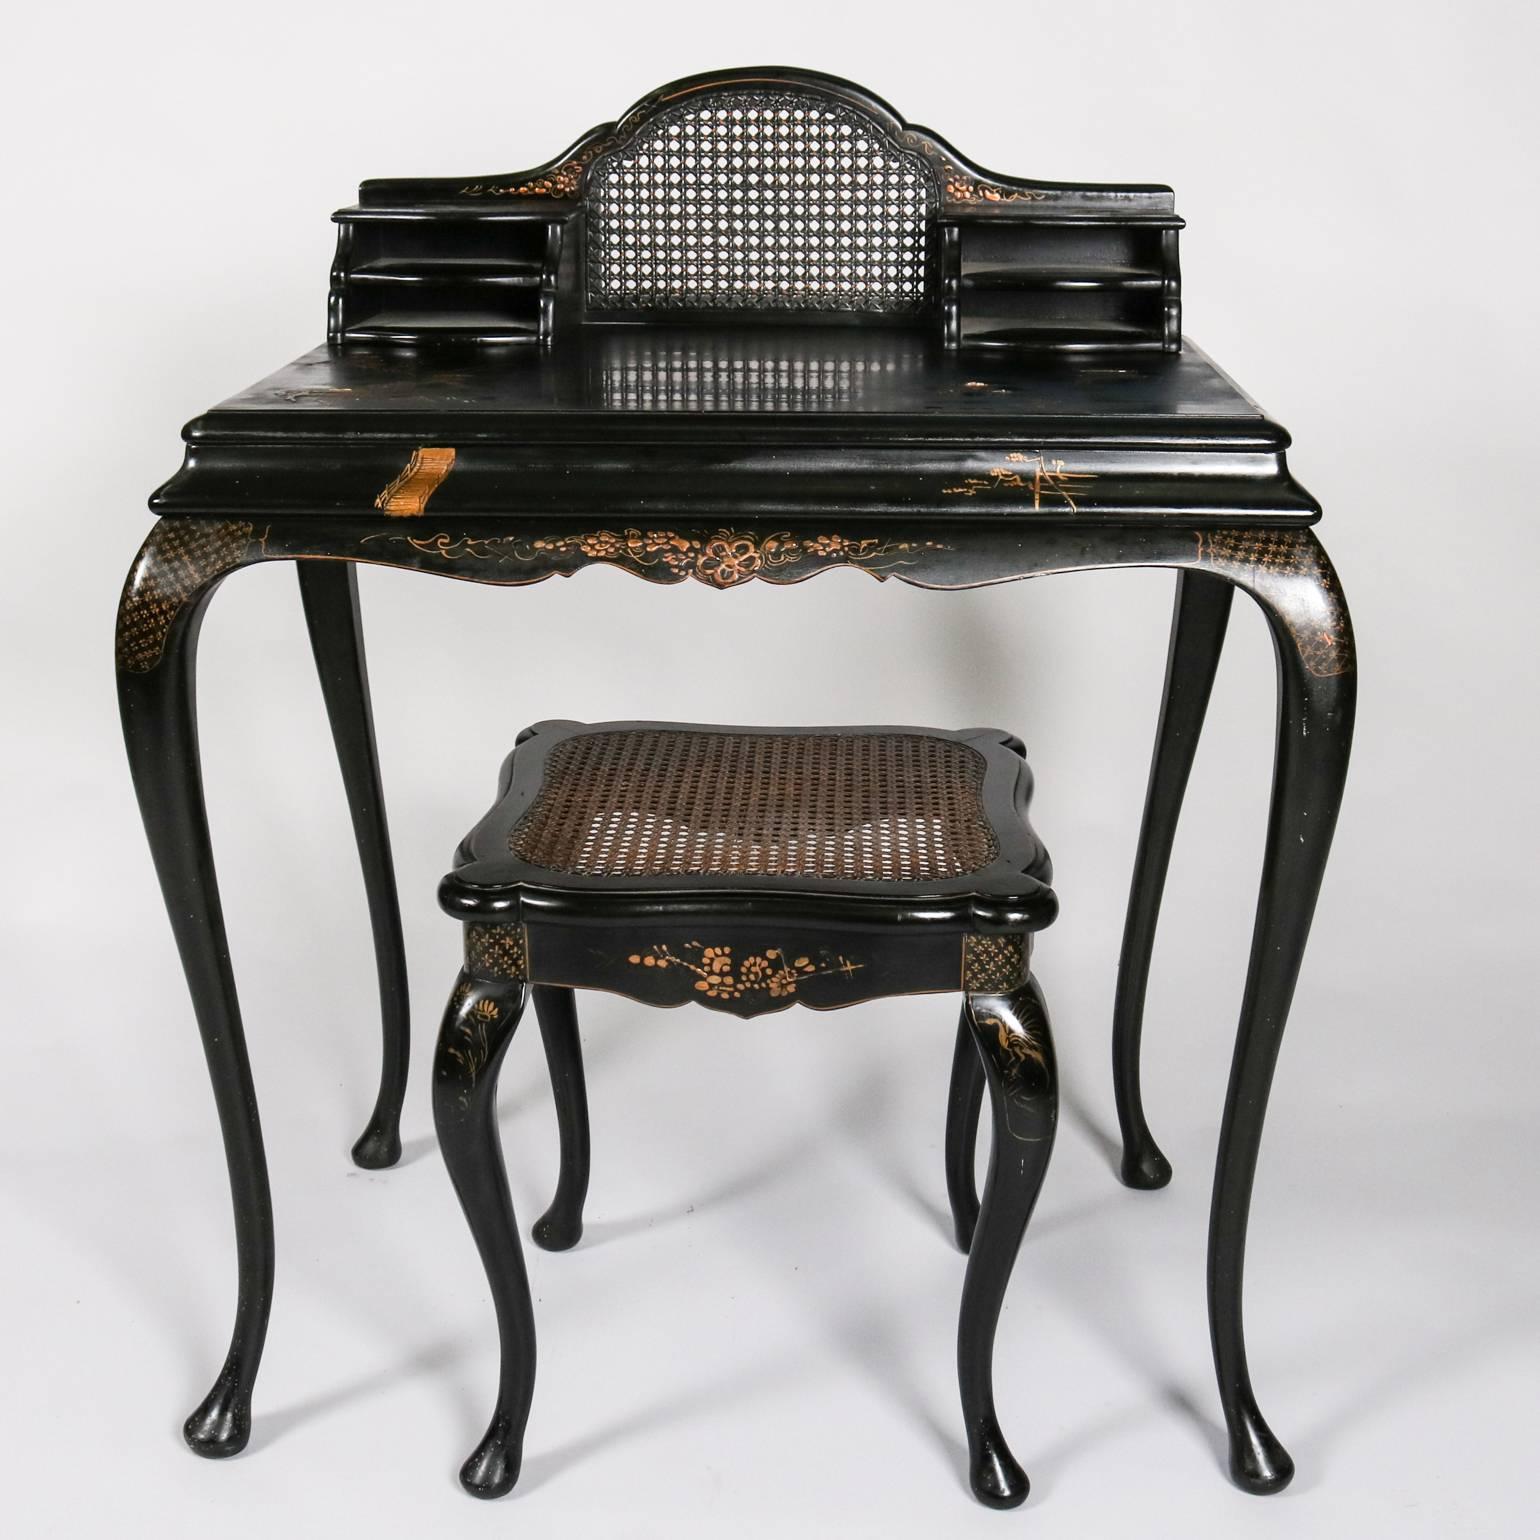 Lacquered Antique Japanned Caned Black Lacquer Paint Decorated Desk & Stool, 19th Century